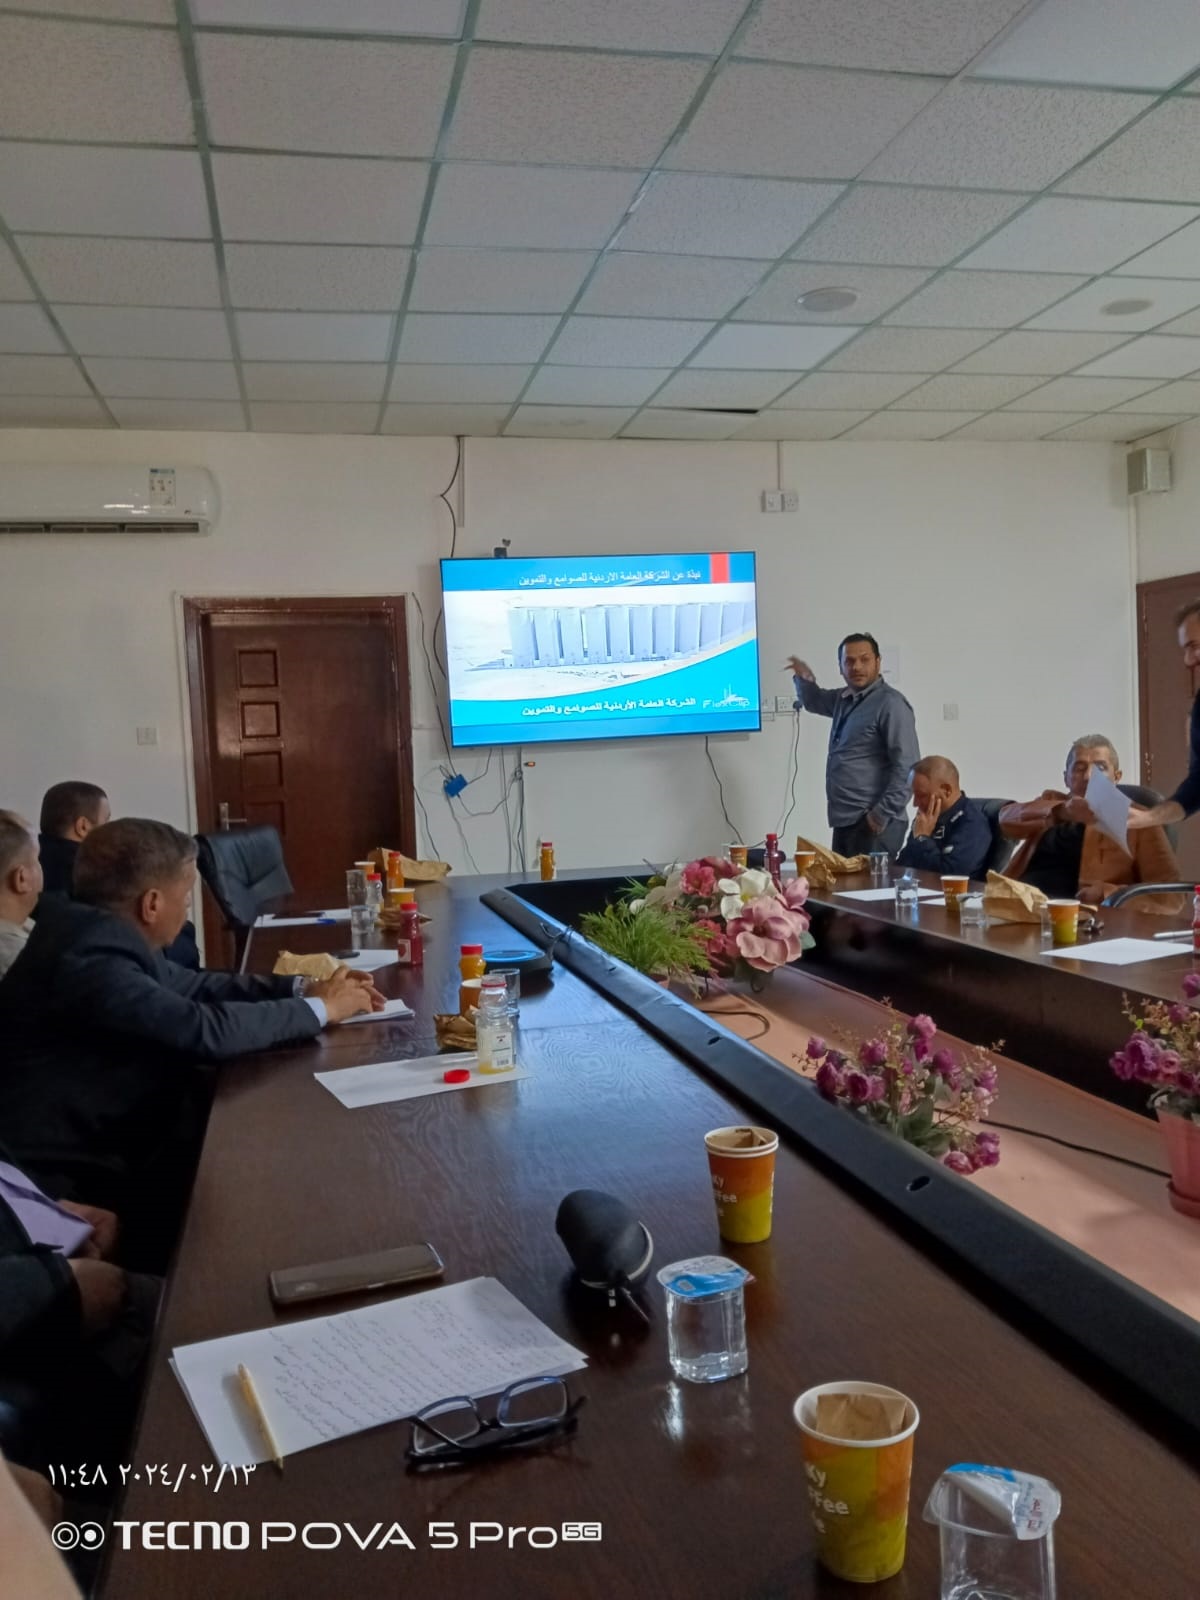 An introductory meeting for public safety, security and environment officials in facilities in the Aqaba region